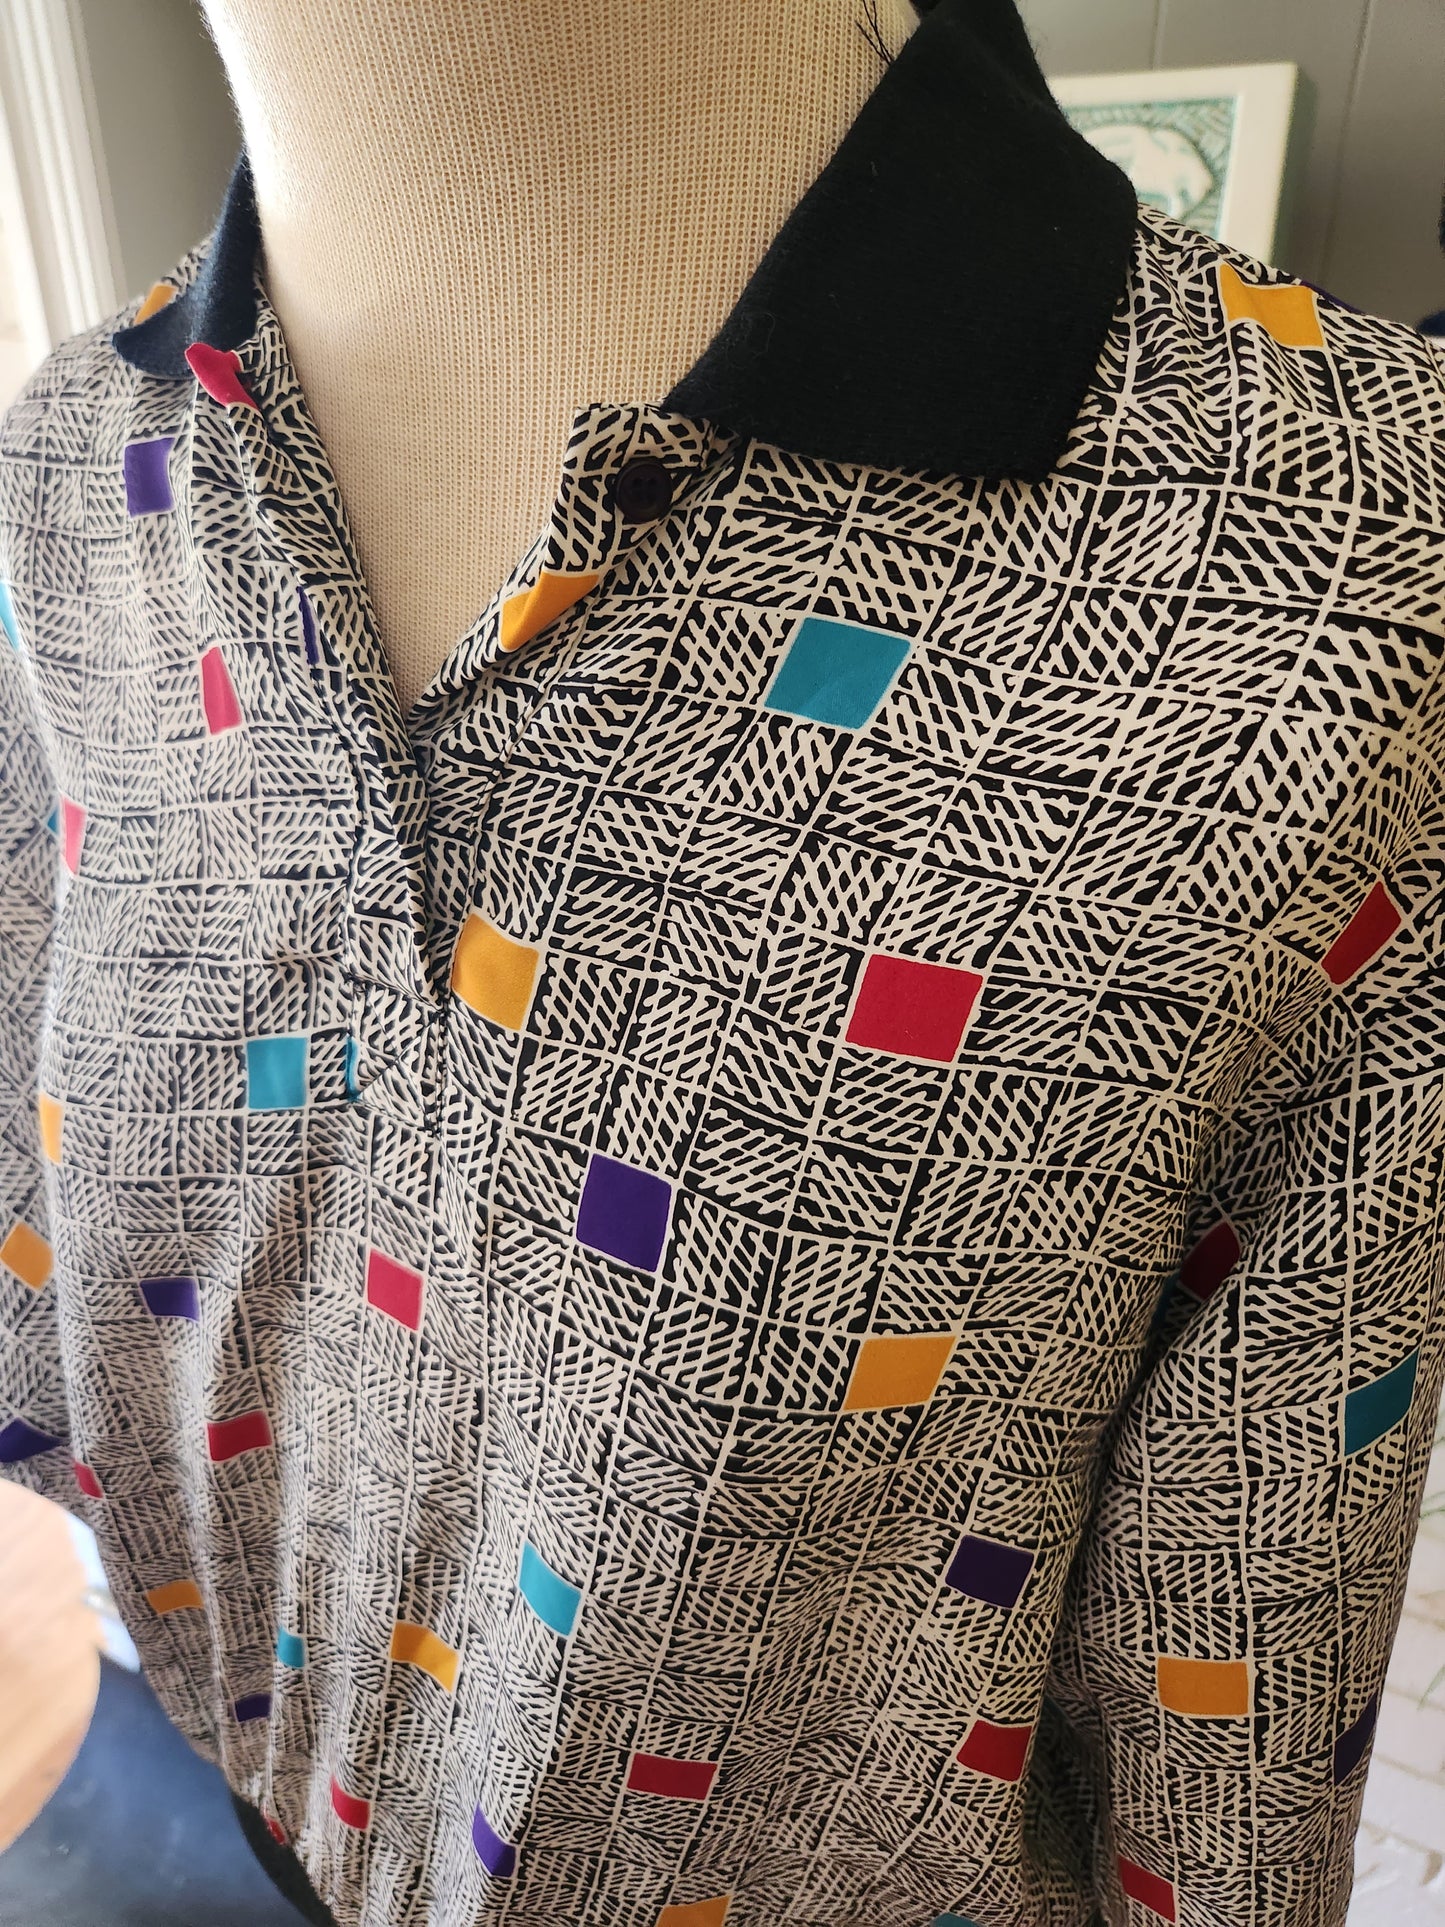 Vintage Long Sleeve 80s Blouse by Notations